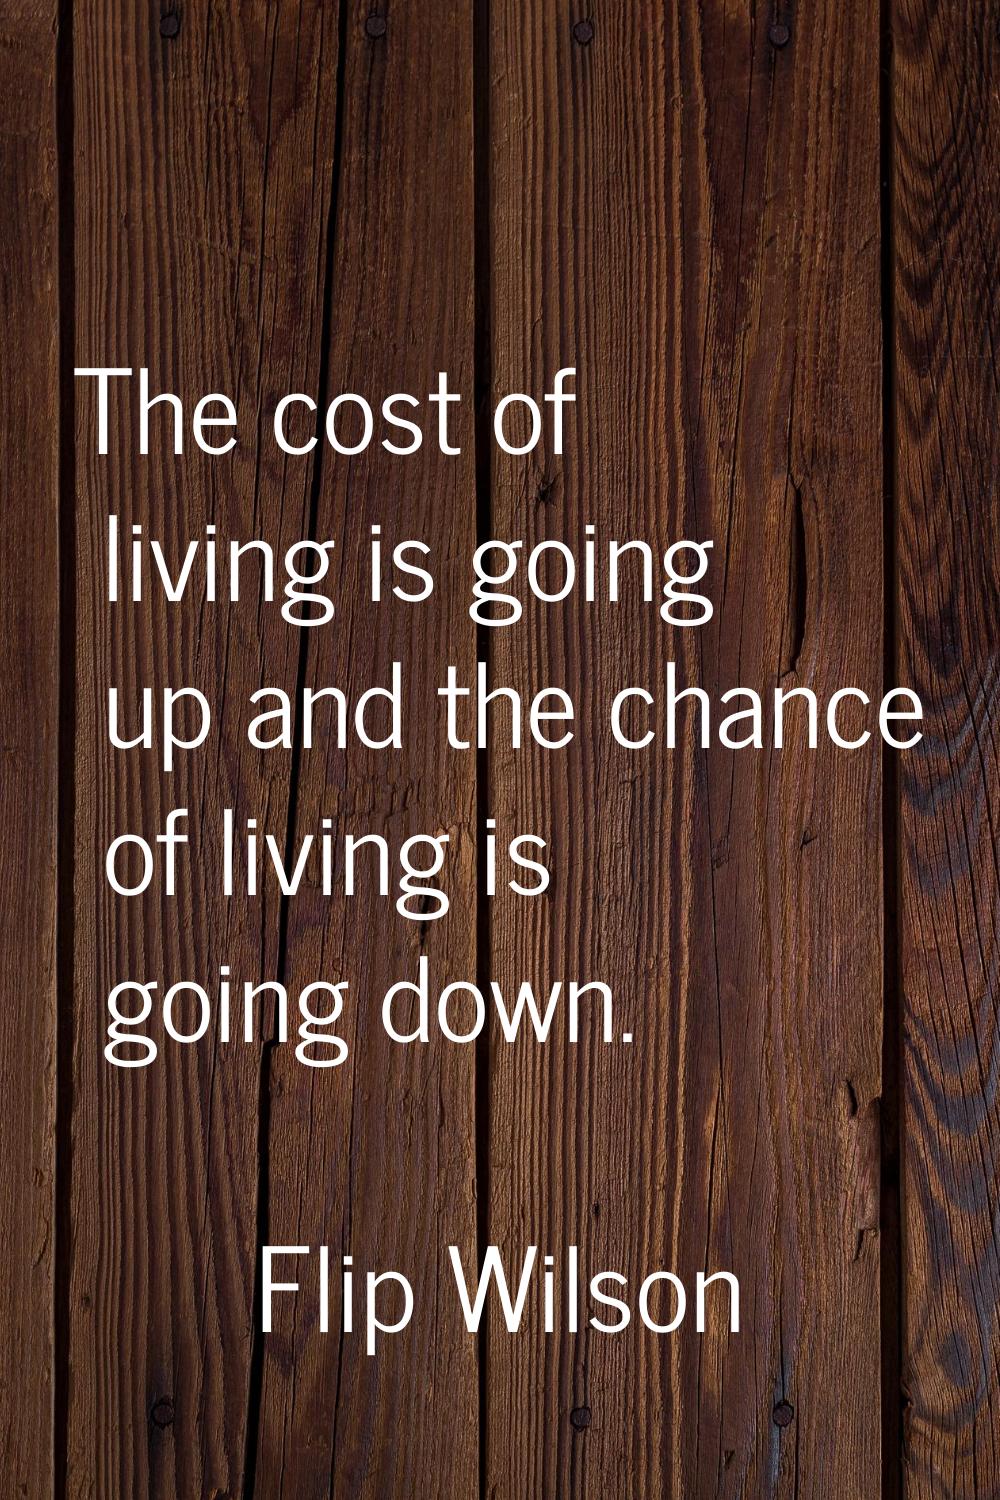 The cost of living is going up and the chance of living is going down.